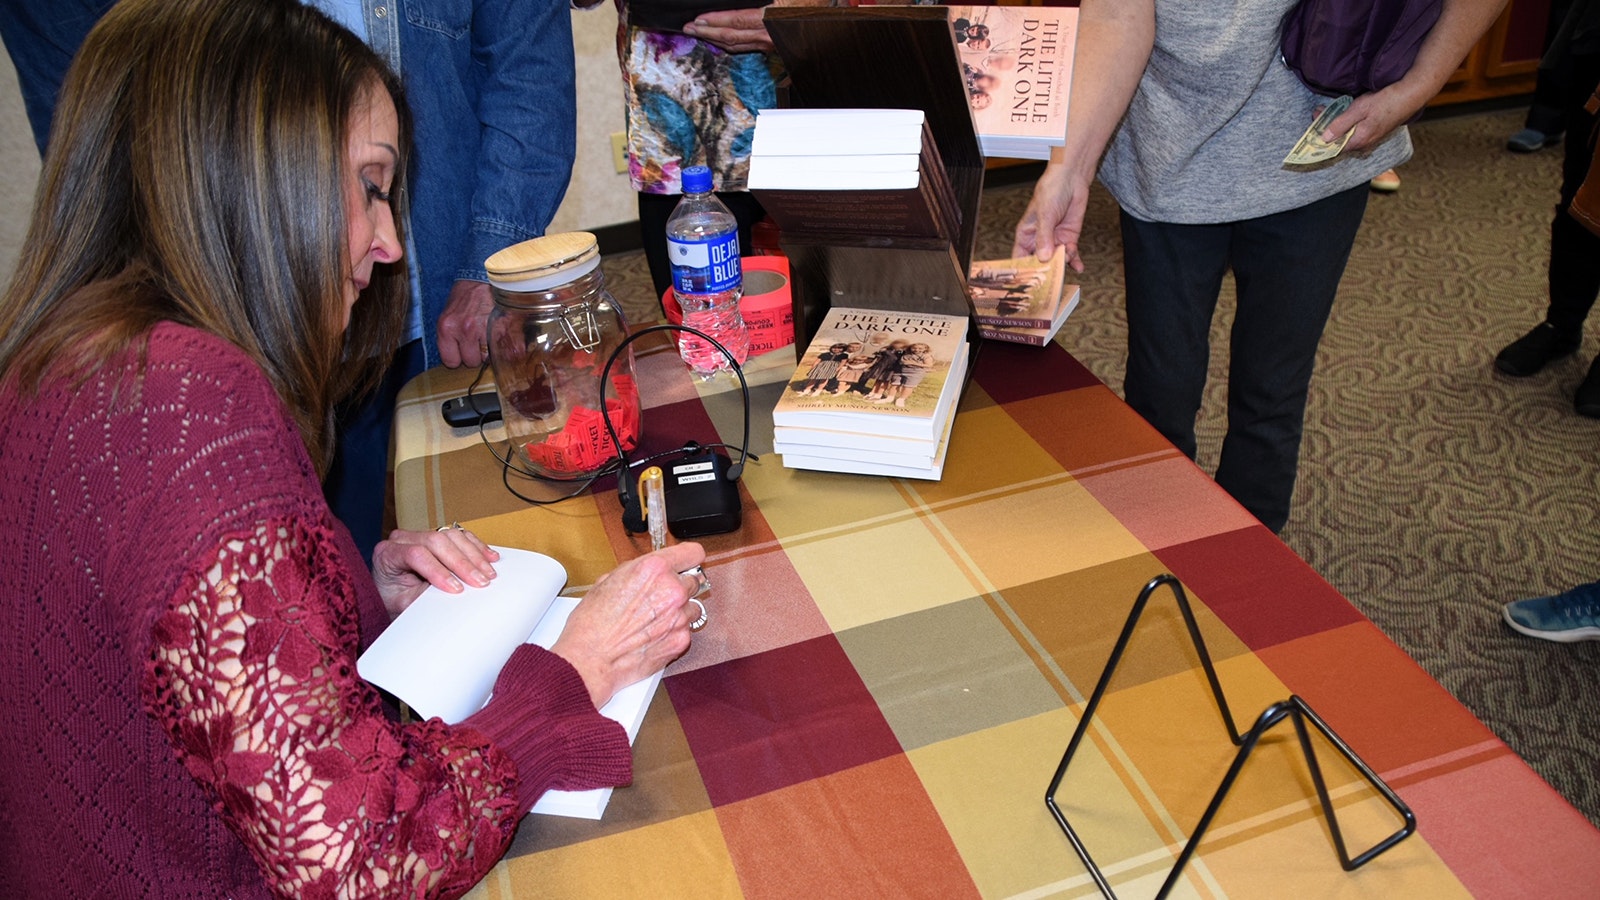 Shirley Munoz Newson signs copies of her book, "The Little Dark One: A True Story of Switched at Birth," at the Campbell County Public Library in her hometown of Gillette, Wyoming.